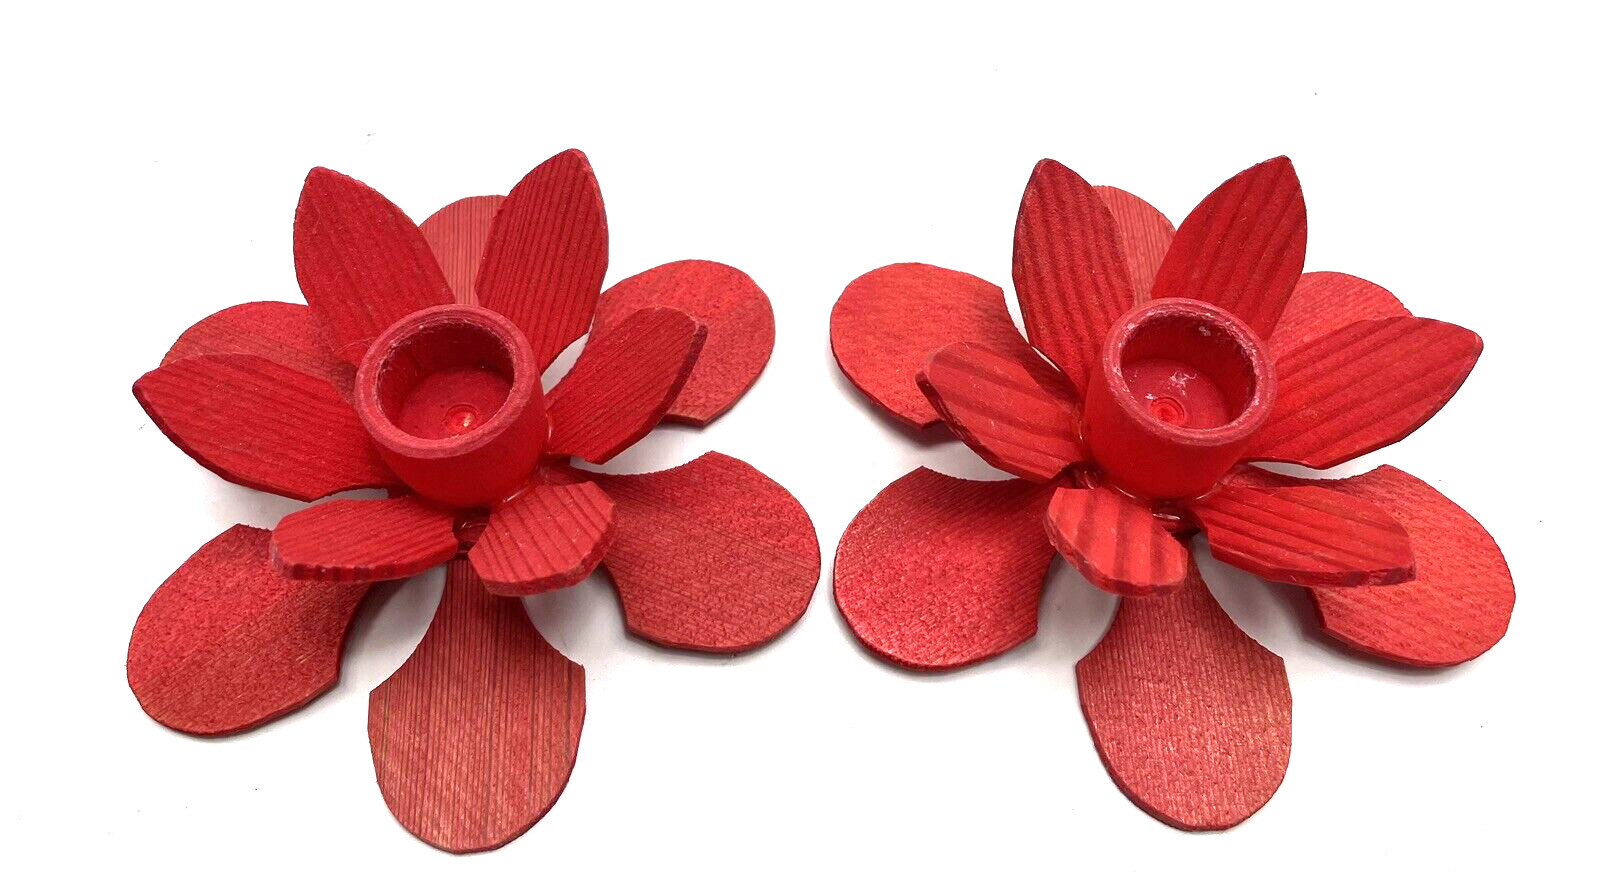 Pair of Vintage Wooden Red Flower Candleholders Made in Sweden